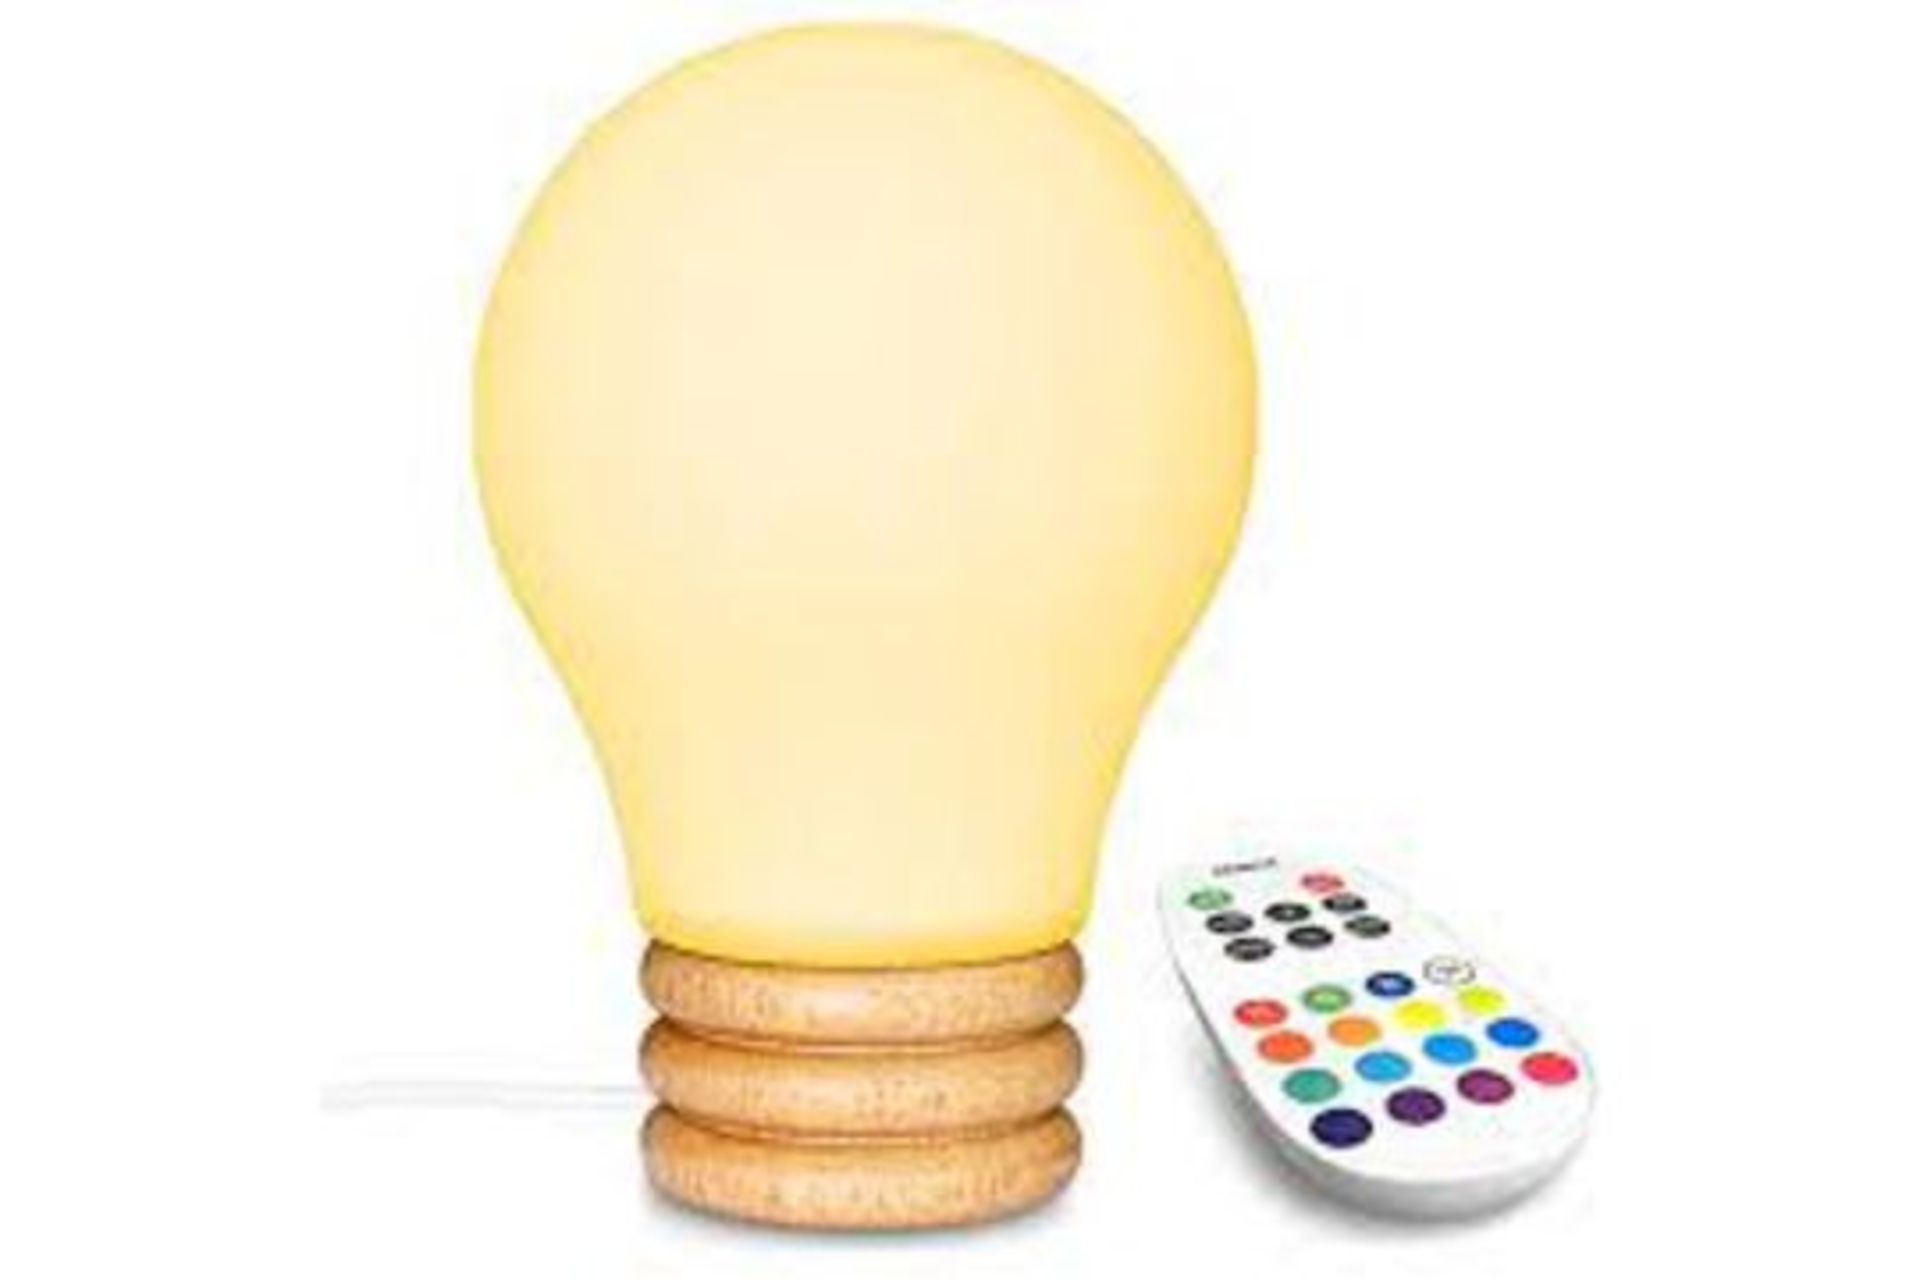 15 X BRAND NEW WOODEN BASE BULB DESIGN NIGHT LIGHT (COLOURS MAY VARY)